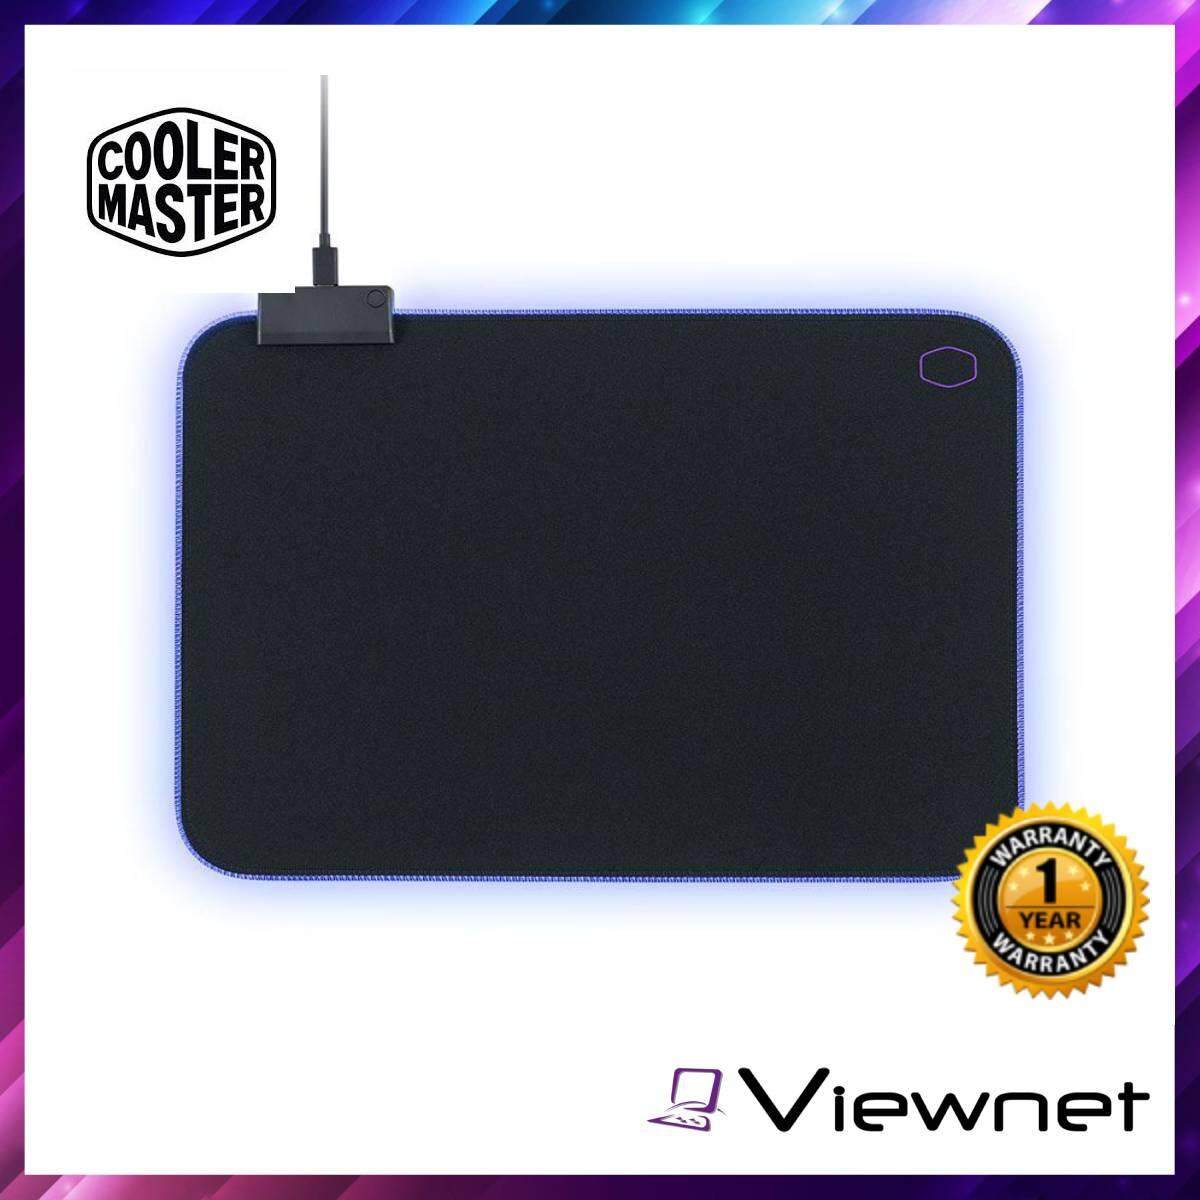 Cooler Master Master MP750 Soft RGB Mouse Pad (Medium, Large, Extralarge), Water resistance, Extra Thick, Smooth, Battle-filed surface.